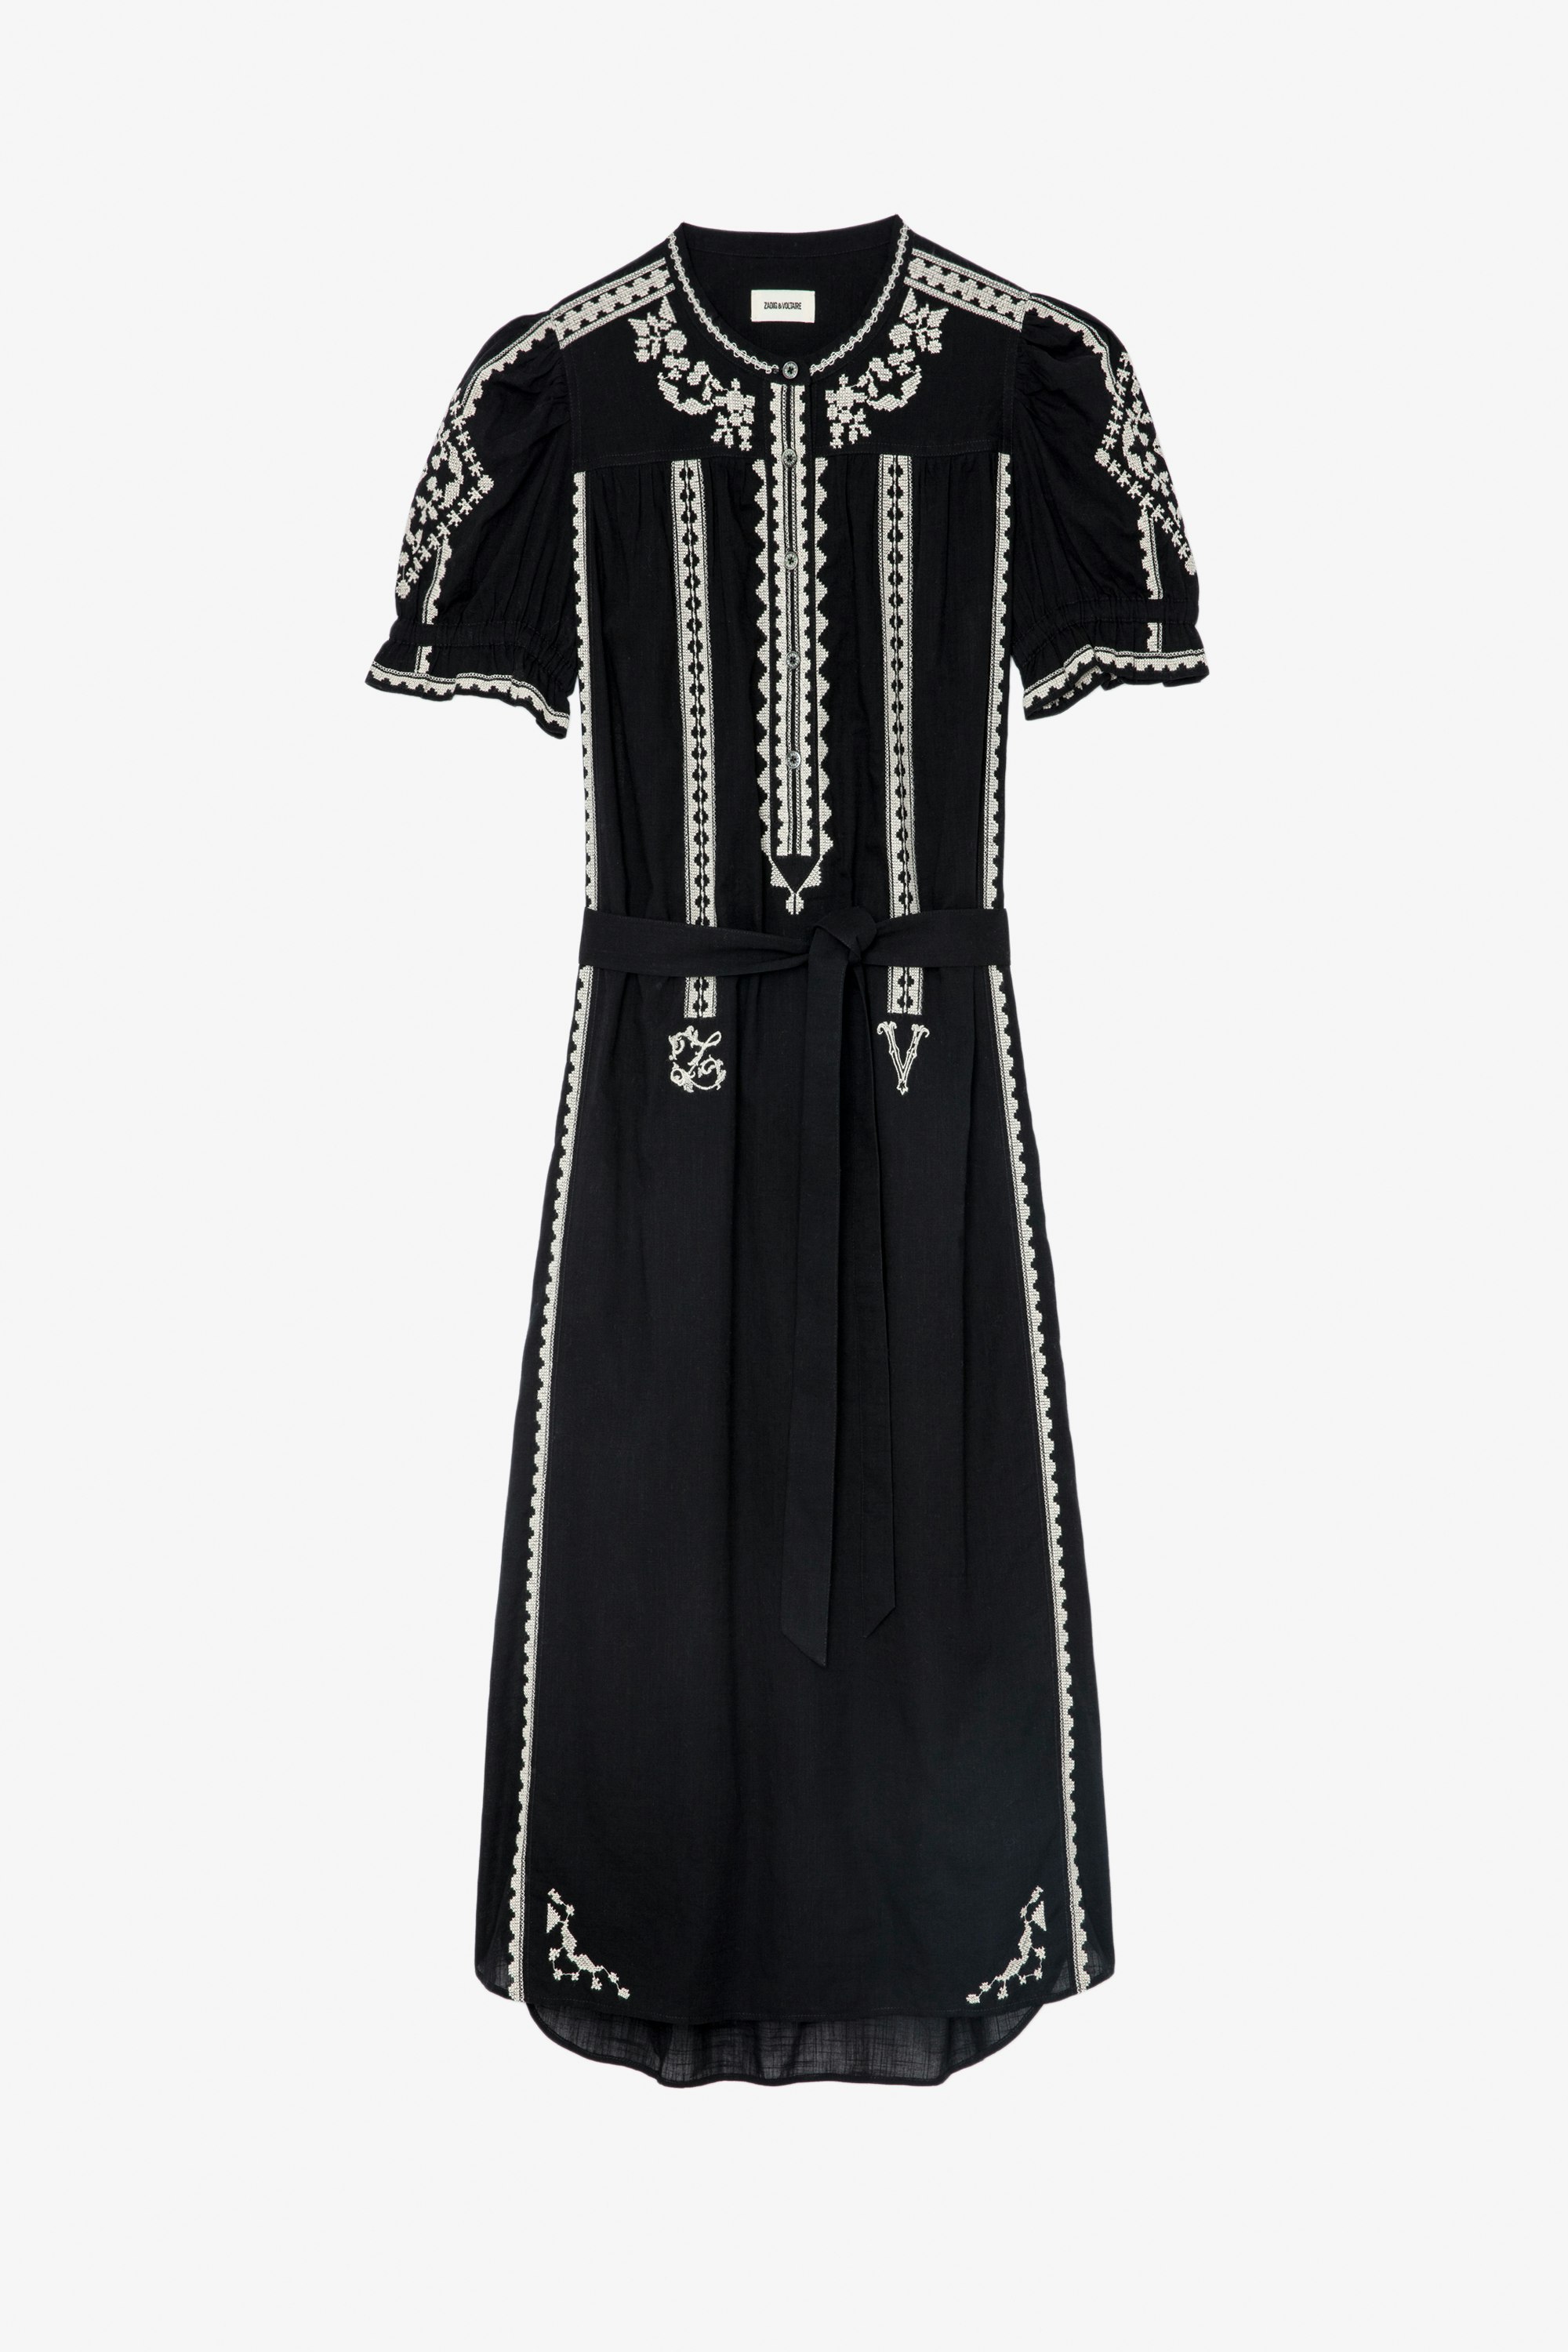 Rigy Dress Women's long dress in black cotton embellished with embroidery, puffed sleeves and tied waist